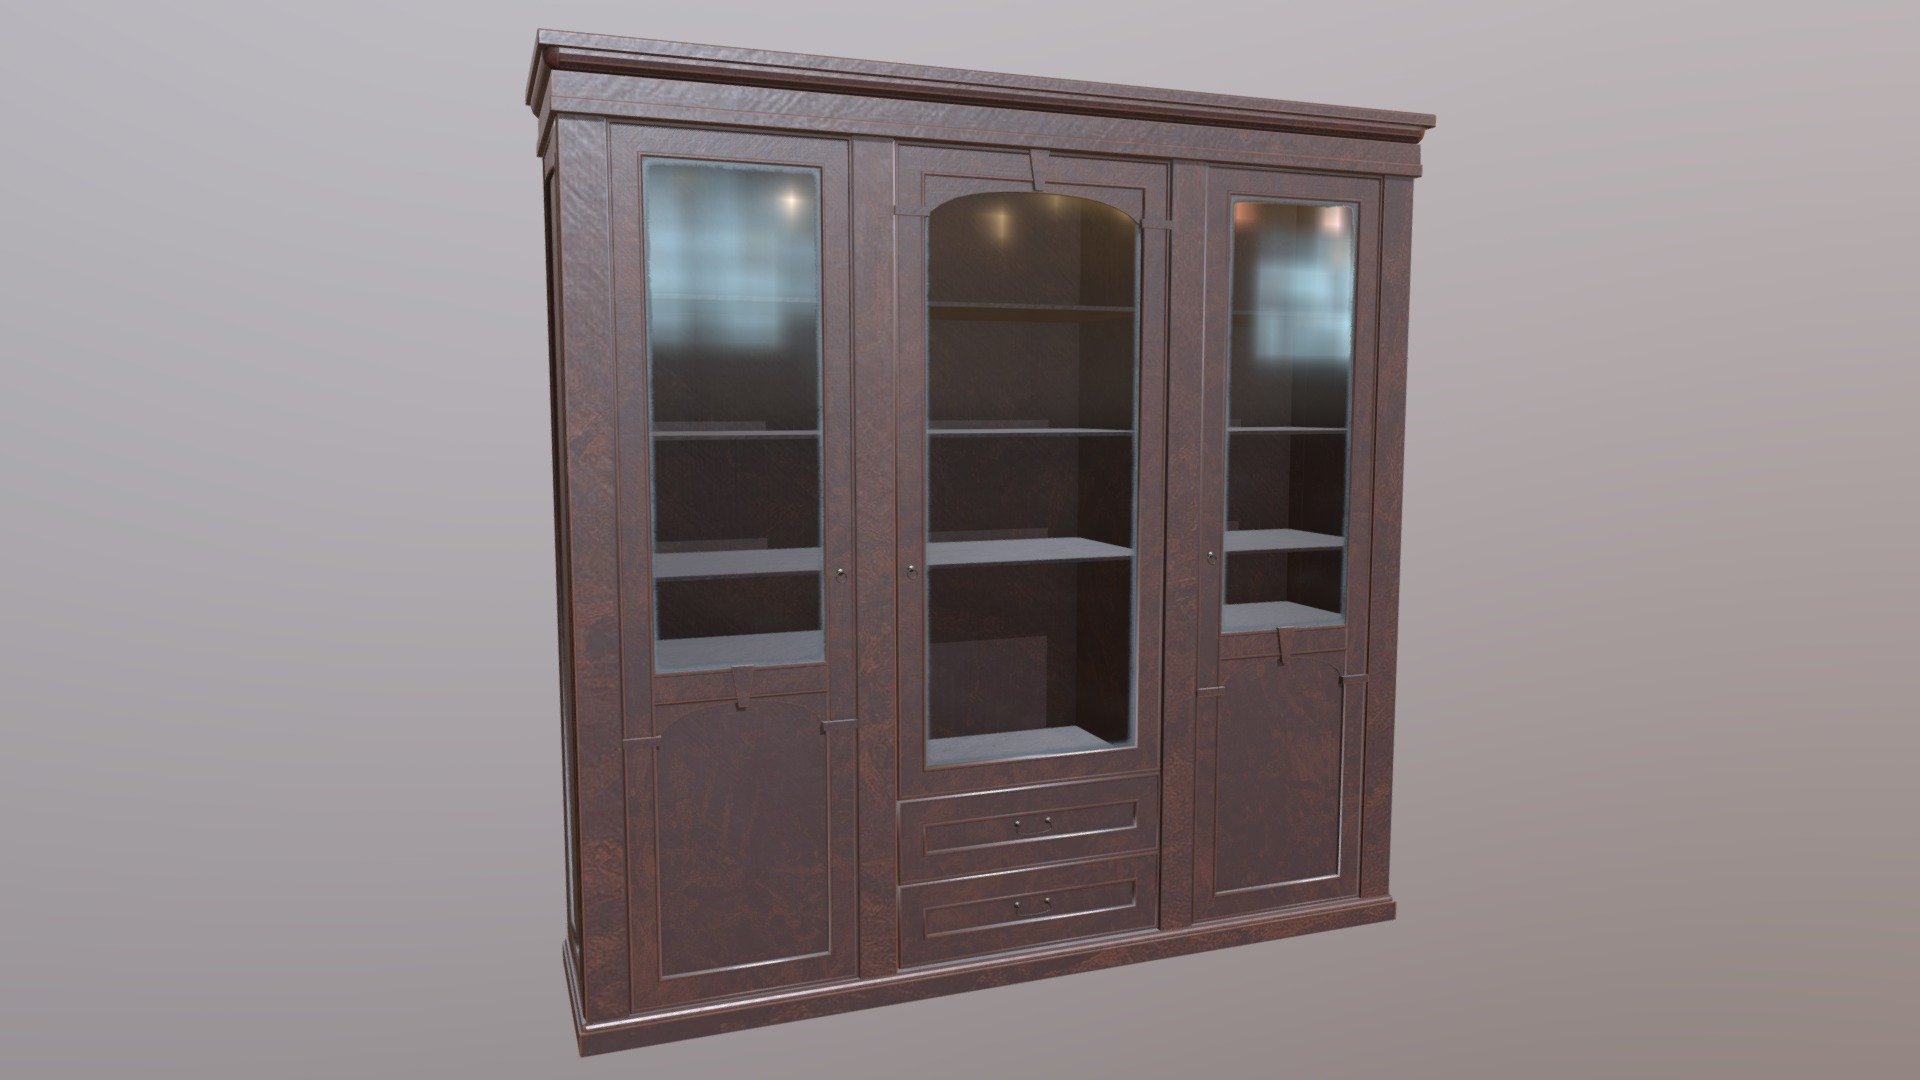 Complect : 1 color material doors can be opened. 
1. File - fbx, 3ds, obj 
2. 2. Unreal Engine textures 2048x2048 
3. 3. Unity textures 2048x2048 
4. 4. Vray textures 2048x2048 - Bookcase old - 3D model by Big Stake Games (@bigstakegames) 3d model